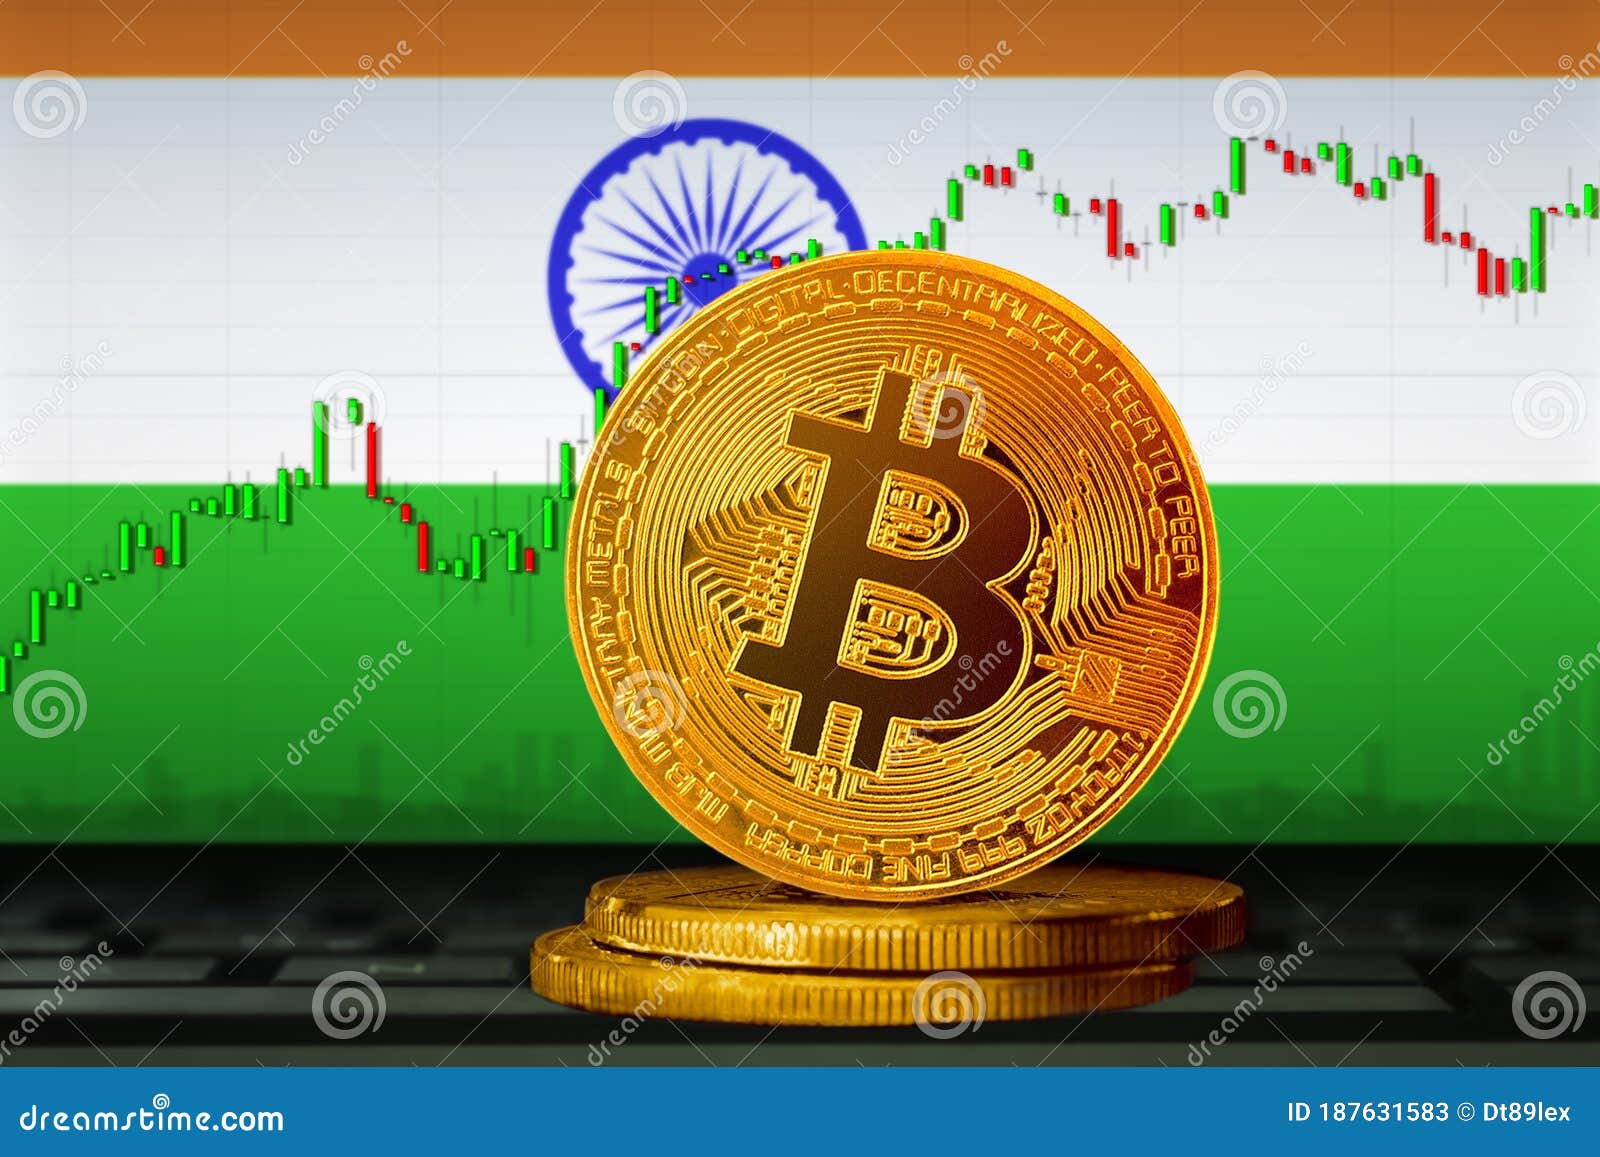 Bitcoin India; Bitcoin BTC Coin On The Background Of The ...